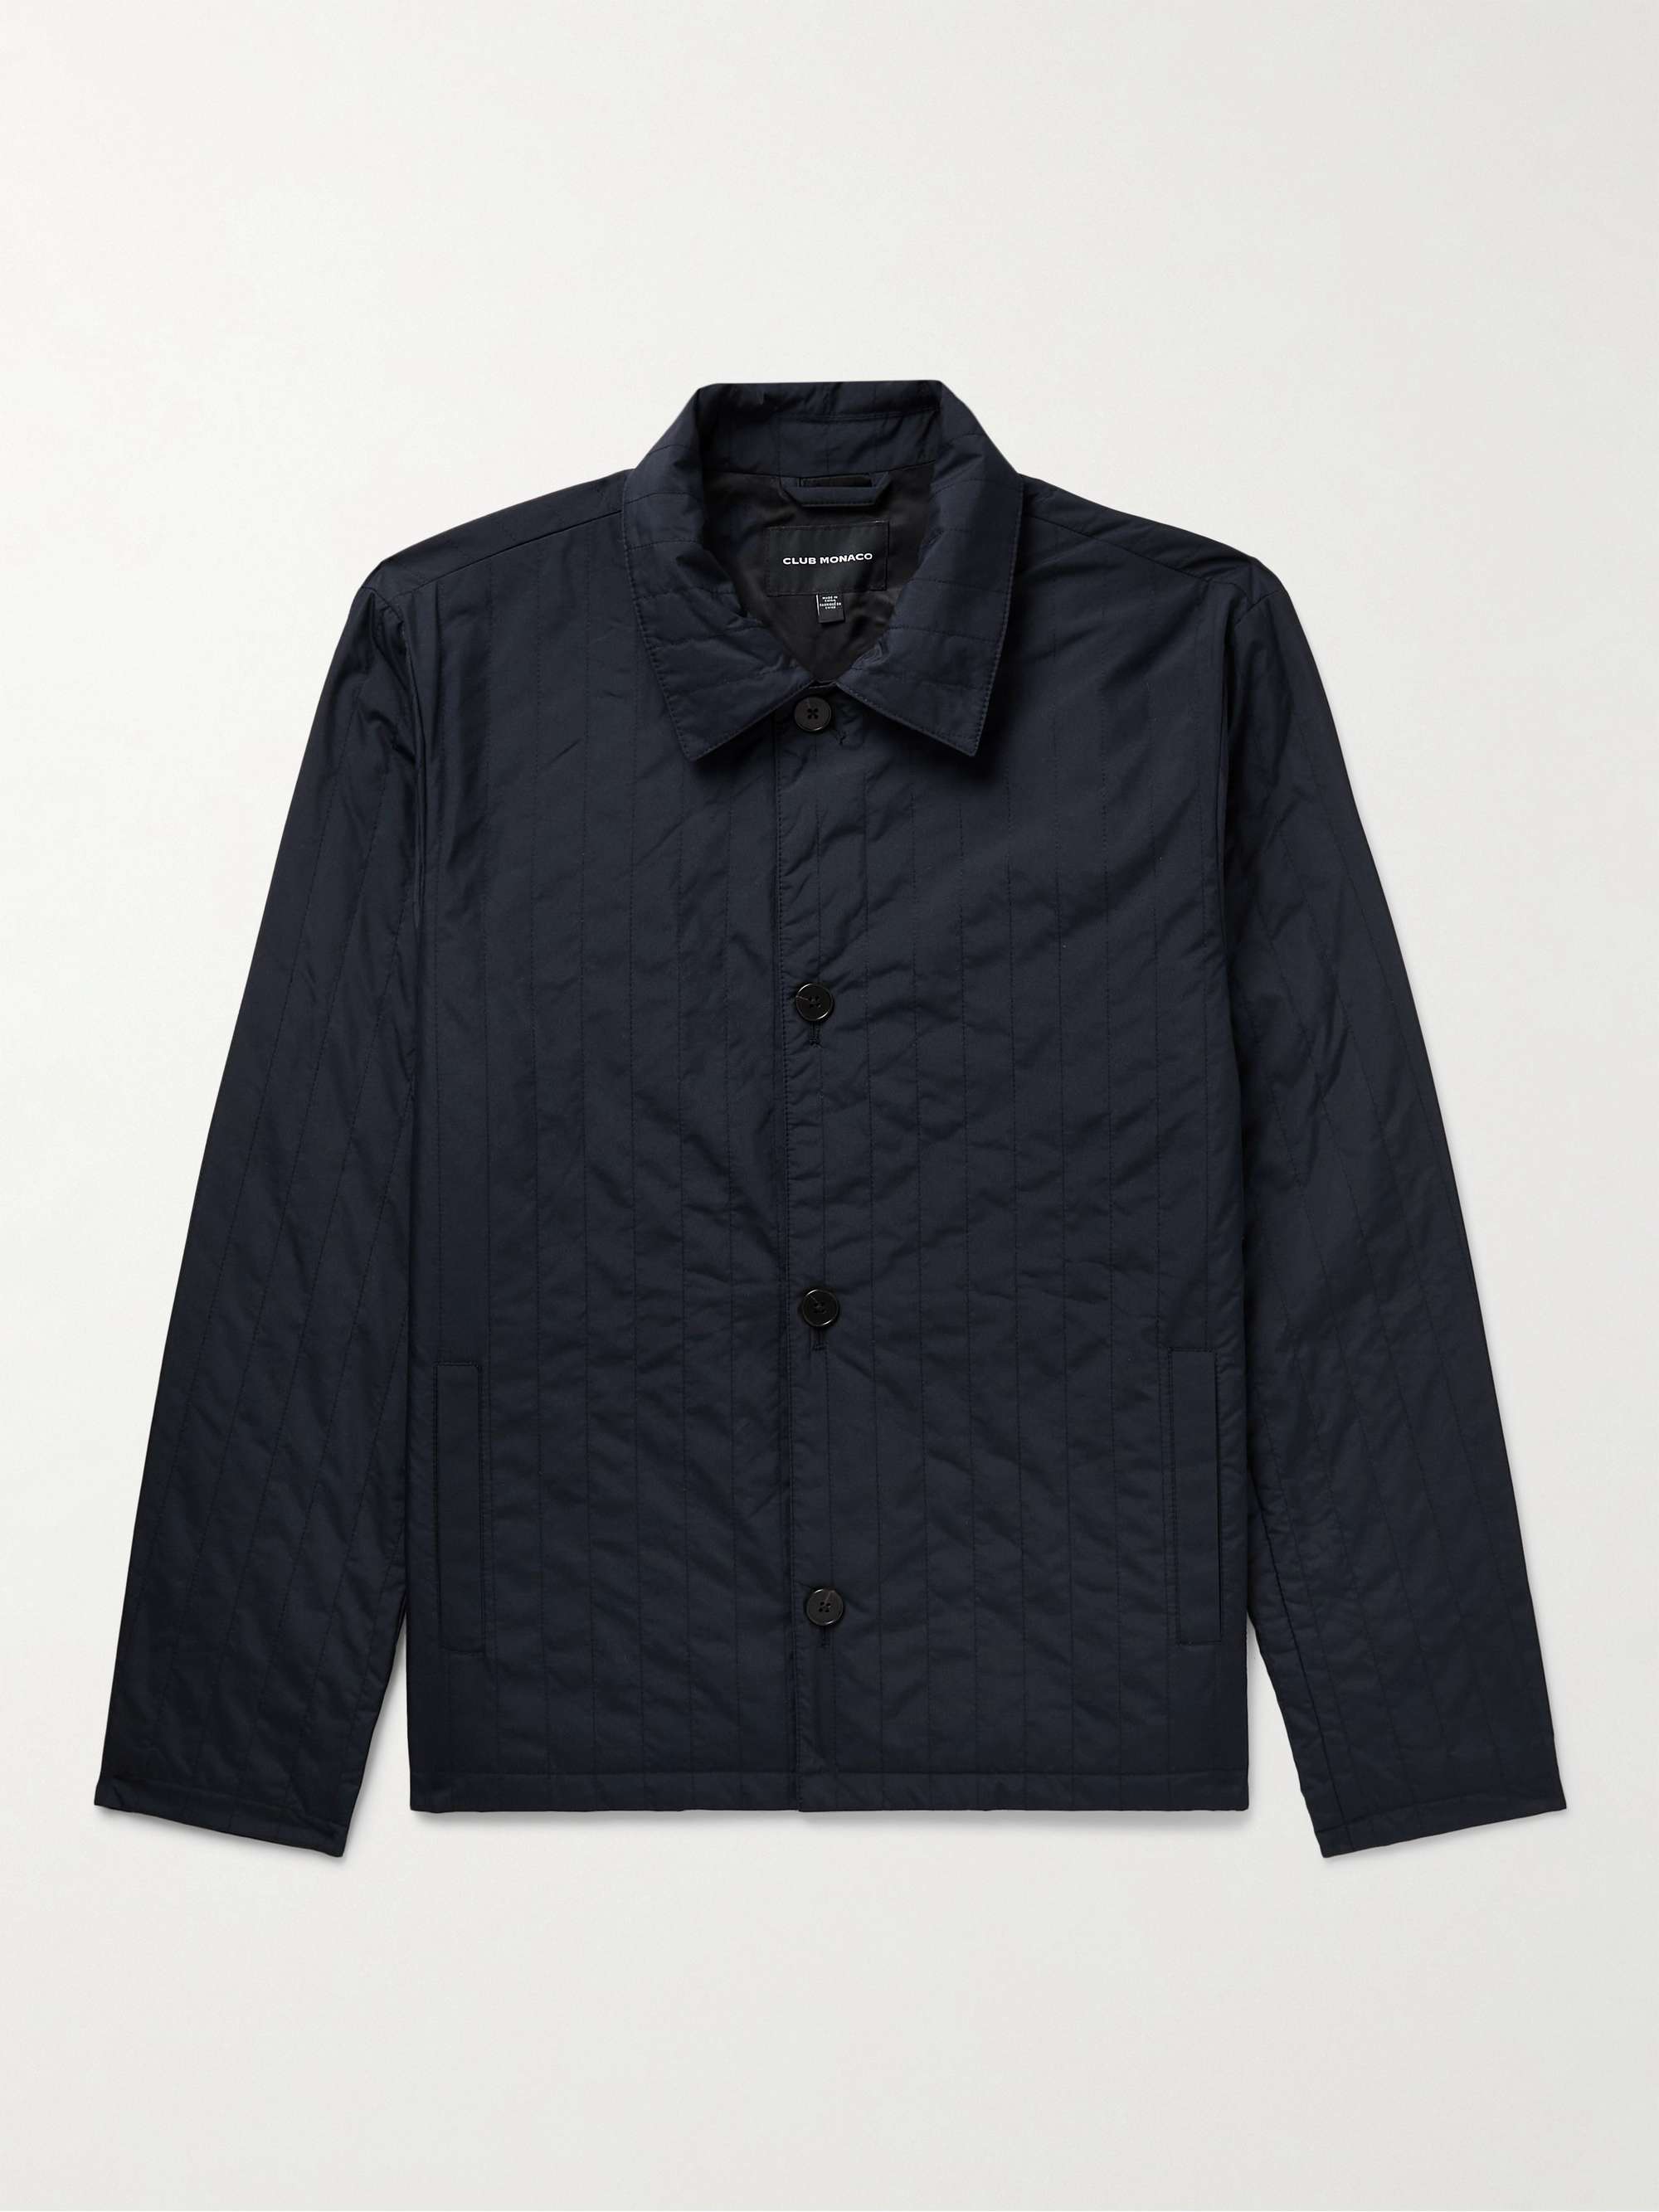 CLUB MONACO Quilted Shell Shirt Jacket for Men | MR PORTER